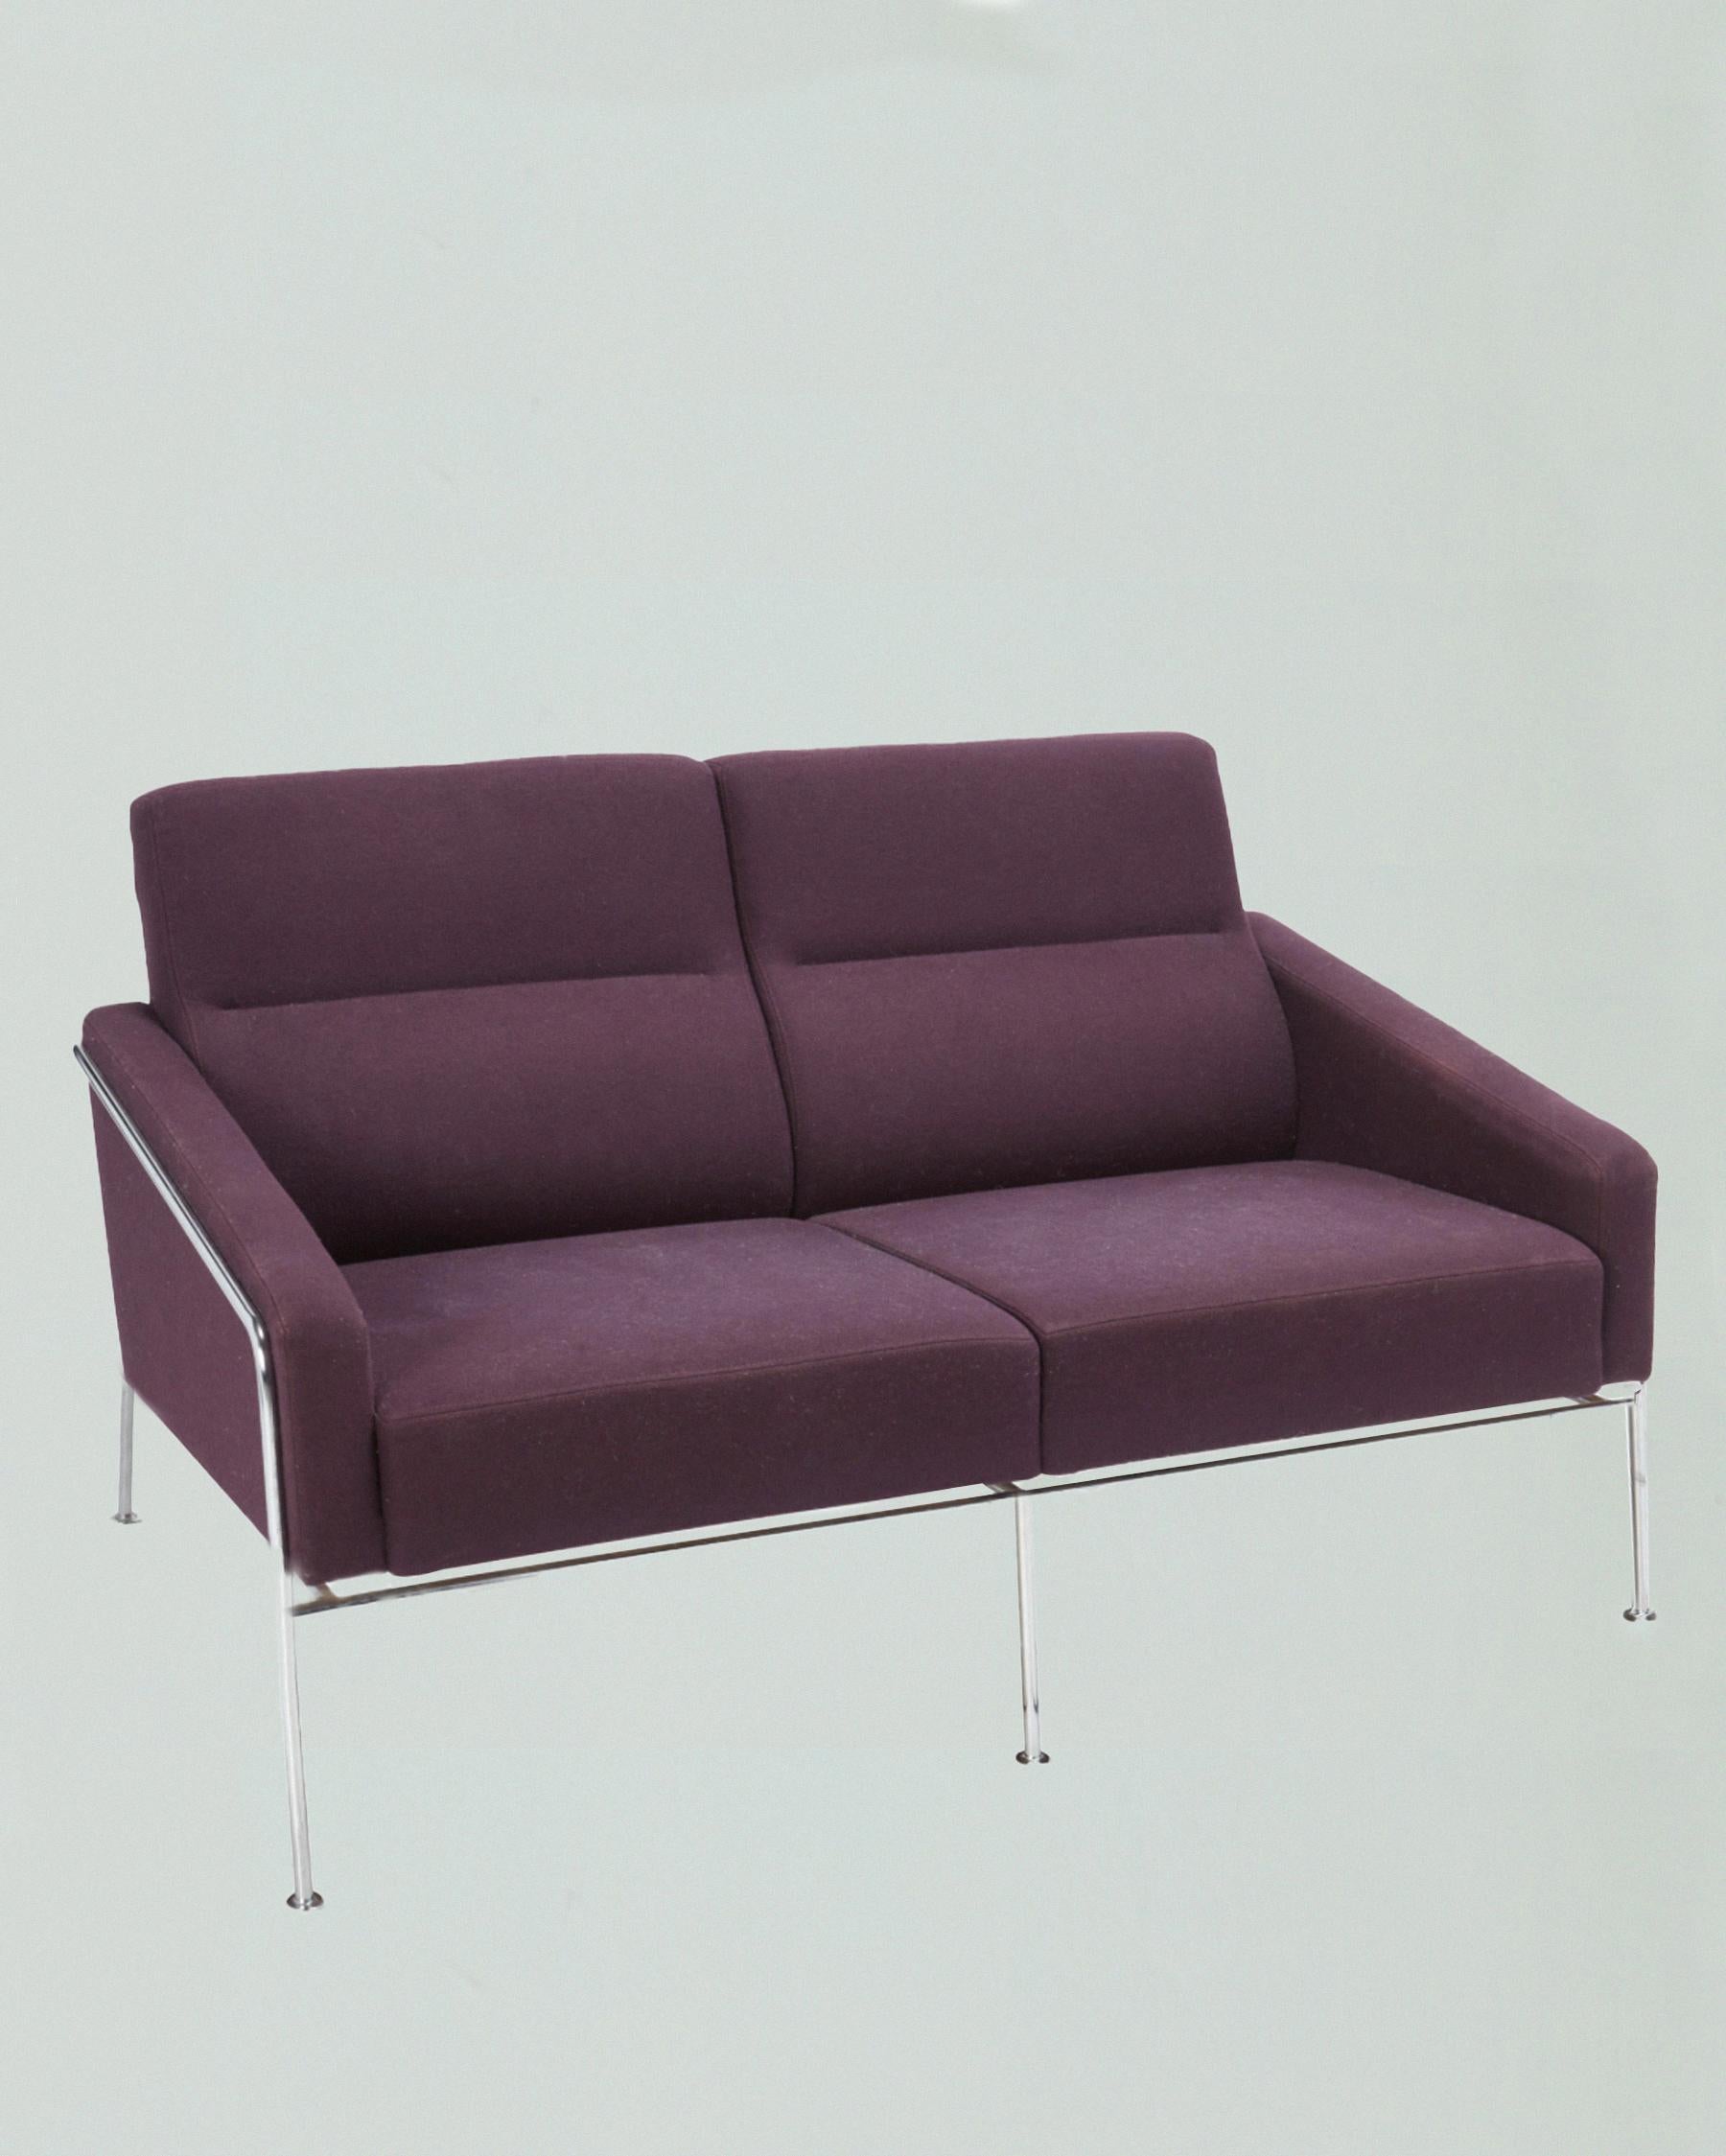 First designed in 1956, this sofa has a foil label to the underside: FH / Fritz Hansen / Made in Denmark. The two-seater sofa, upholstered in violet-colored wool, is in very good condition with its original fabric. The wrap-around chromed metal